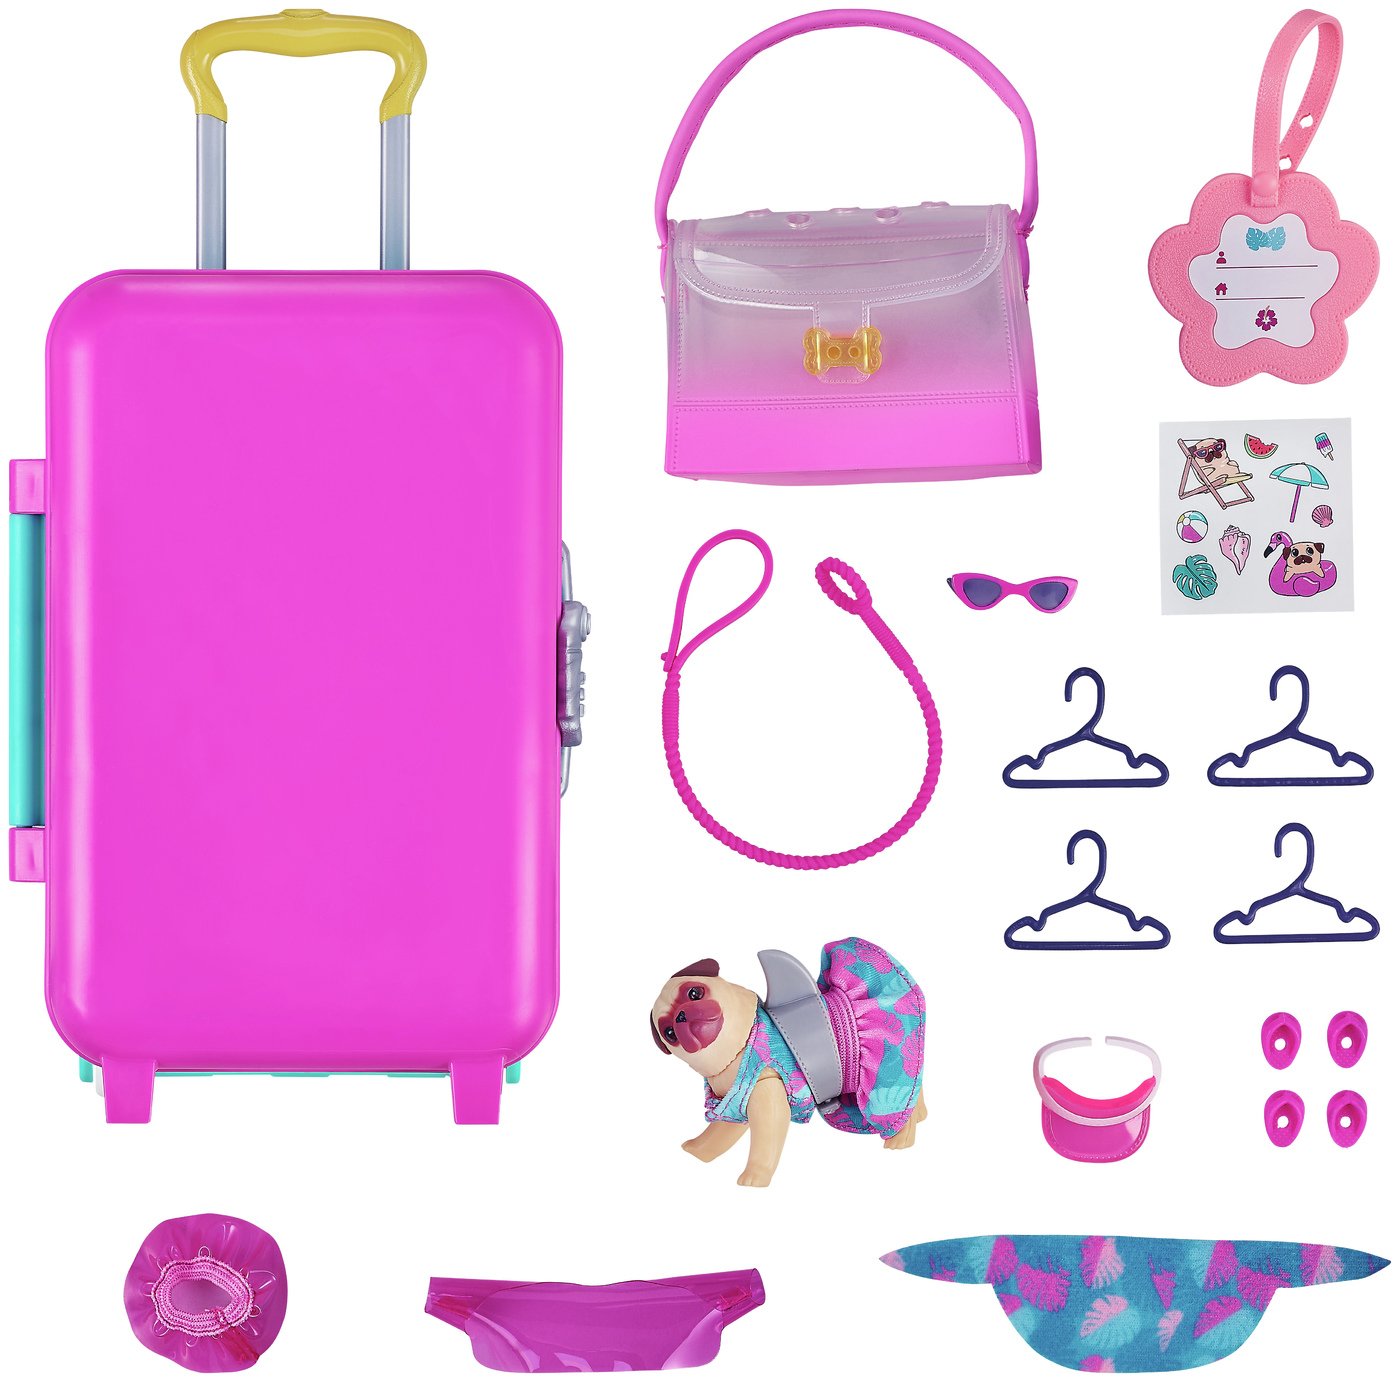 Real Littles Cutie Carries Pet Roller Case and Bag Pack review